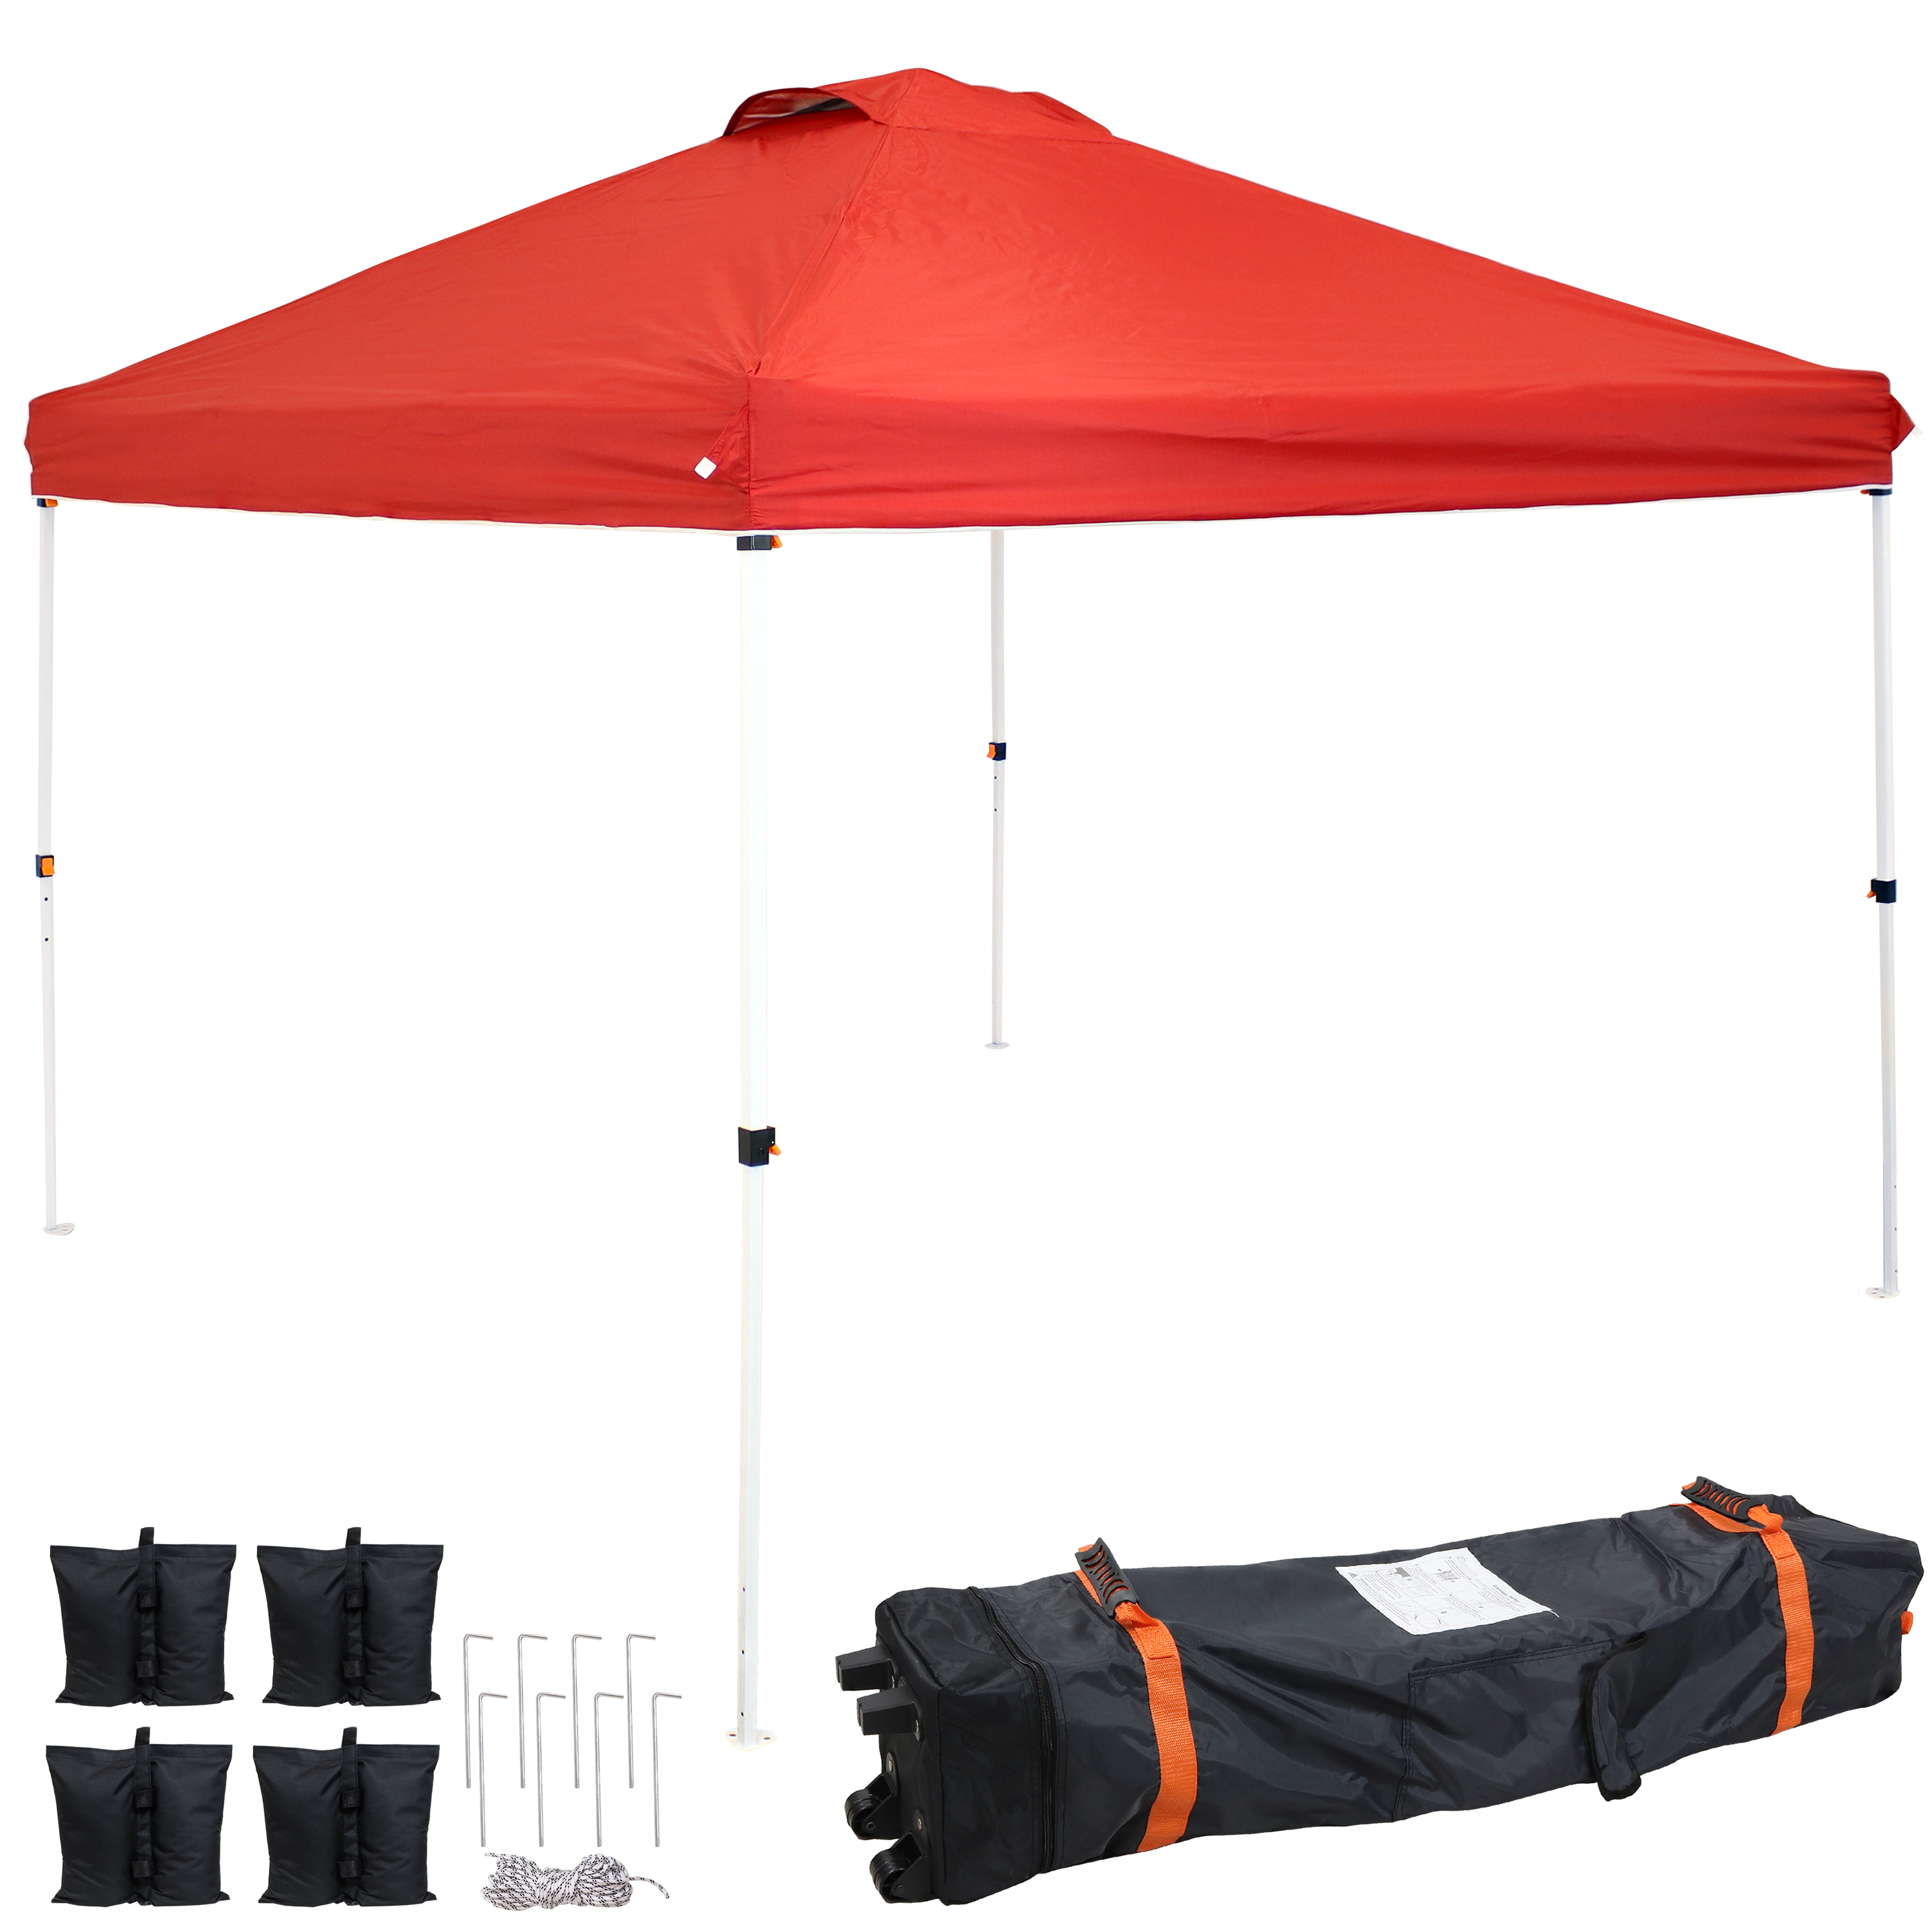 Premium Pop-Up Canopy with Sandbags - 12 ft x 12 ft - Red